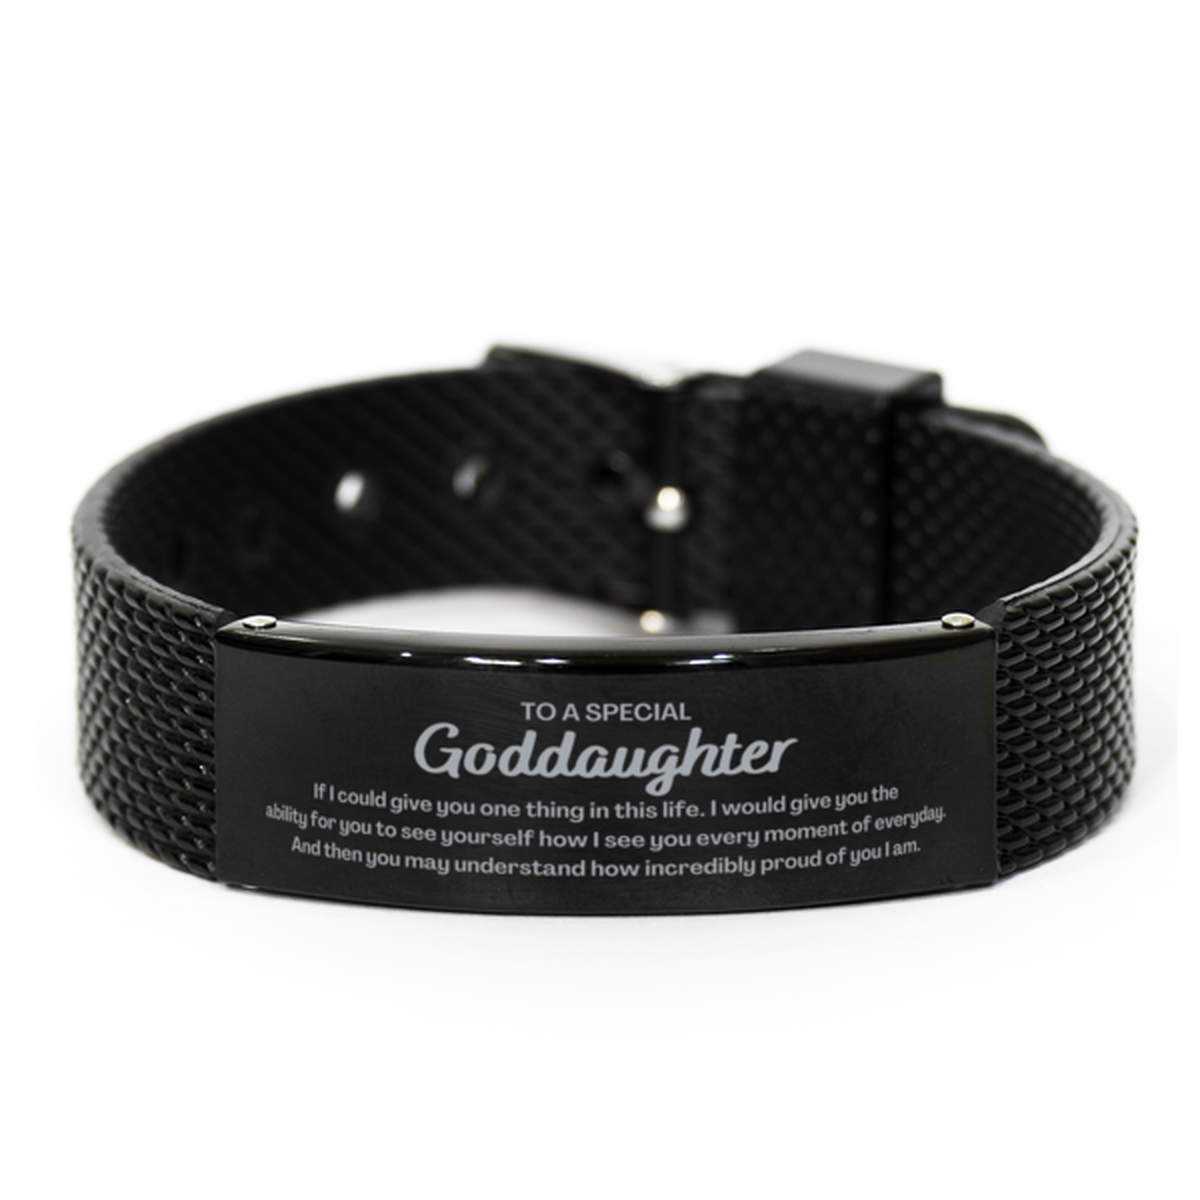 To My Goddaughter Black Shark Mesh Bracelet, Gifts For Goddaughter Engraved, Inspirational Gifts for Christmas Birthday, Epic Gifts for Goddaughter To A Special Goddaughter how incredibly proud of you I am